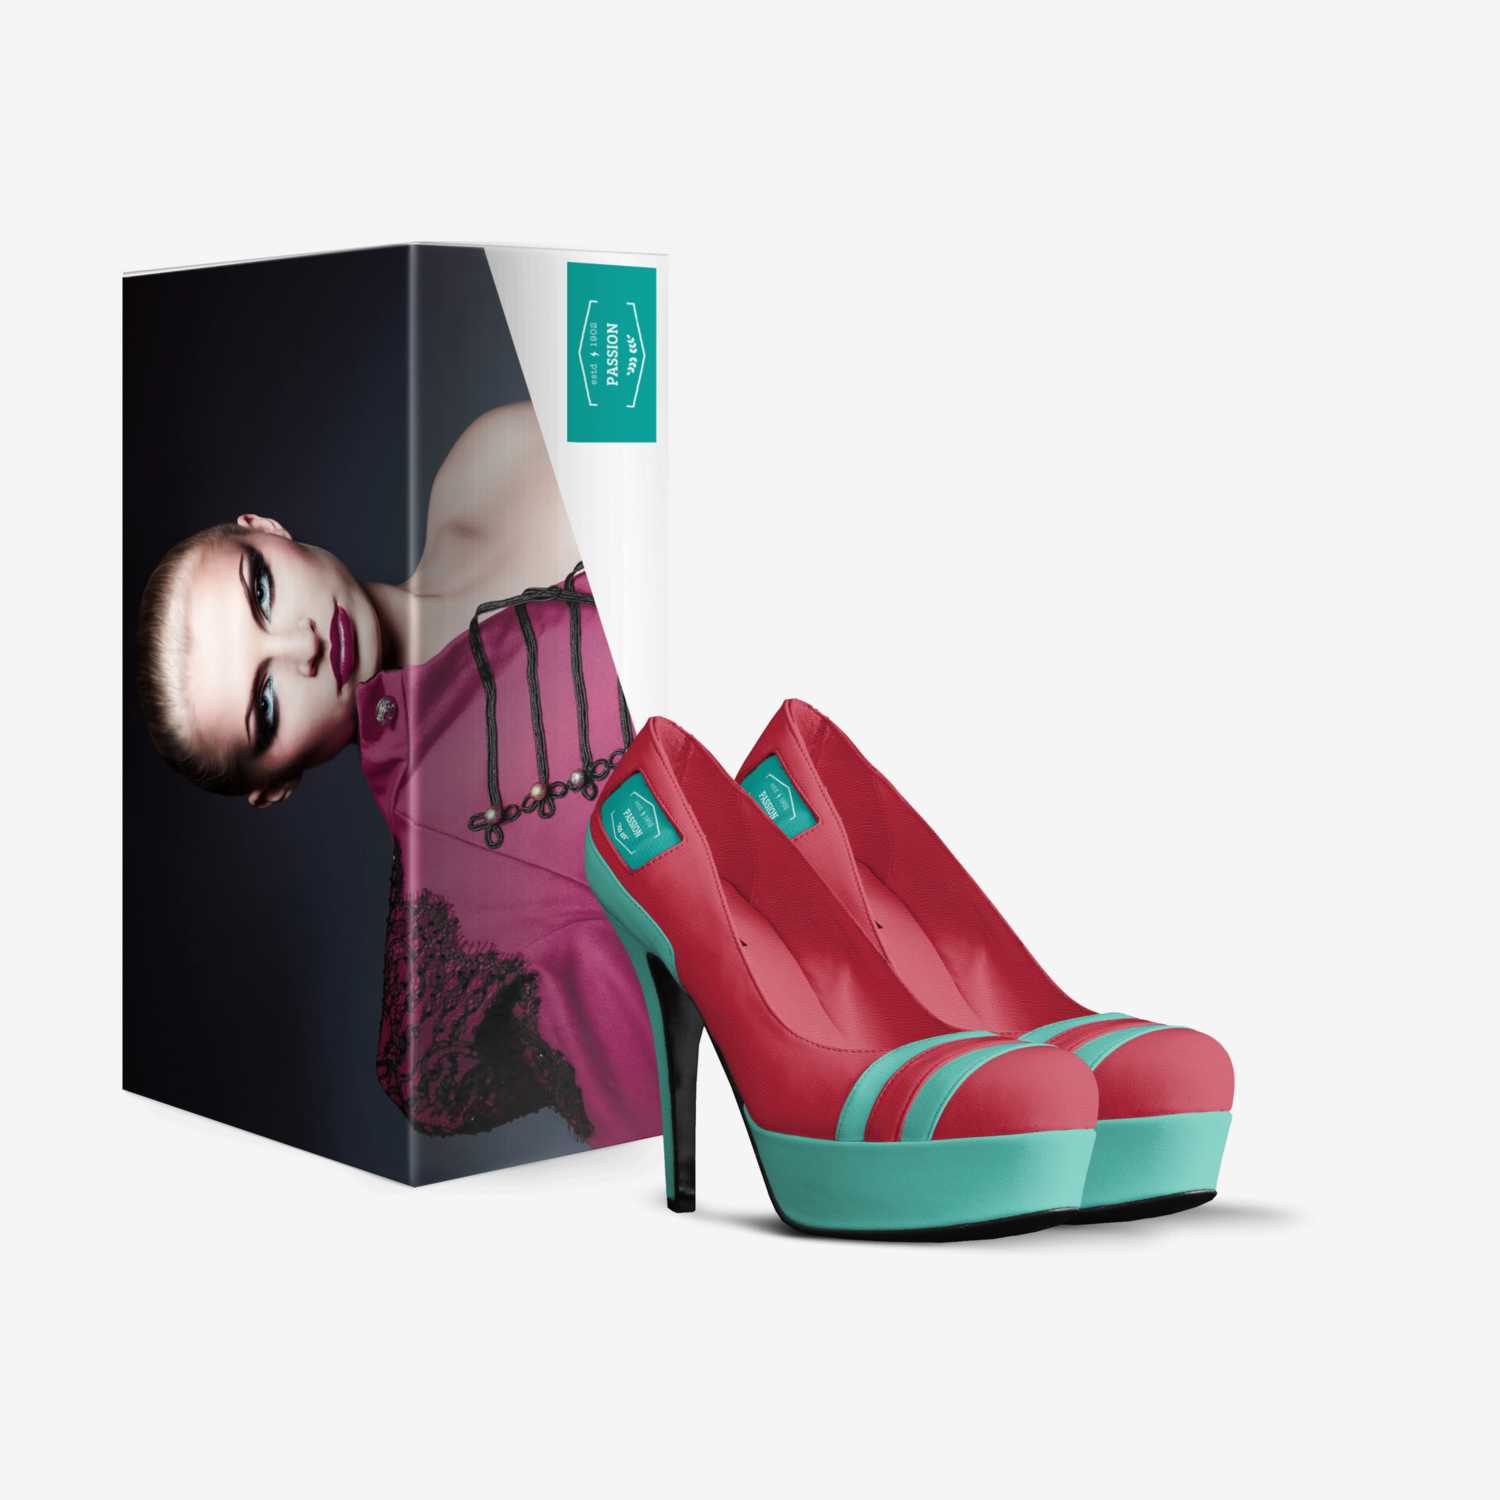 Lady Passion custom made in Italy shoes by Rakeem Mitchum | Box view